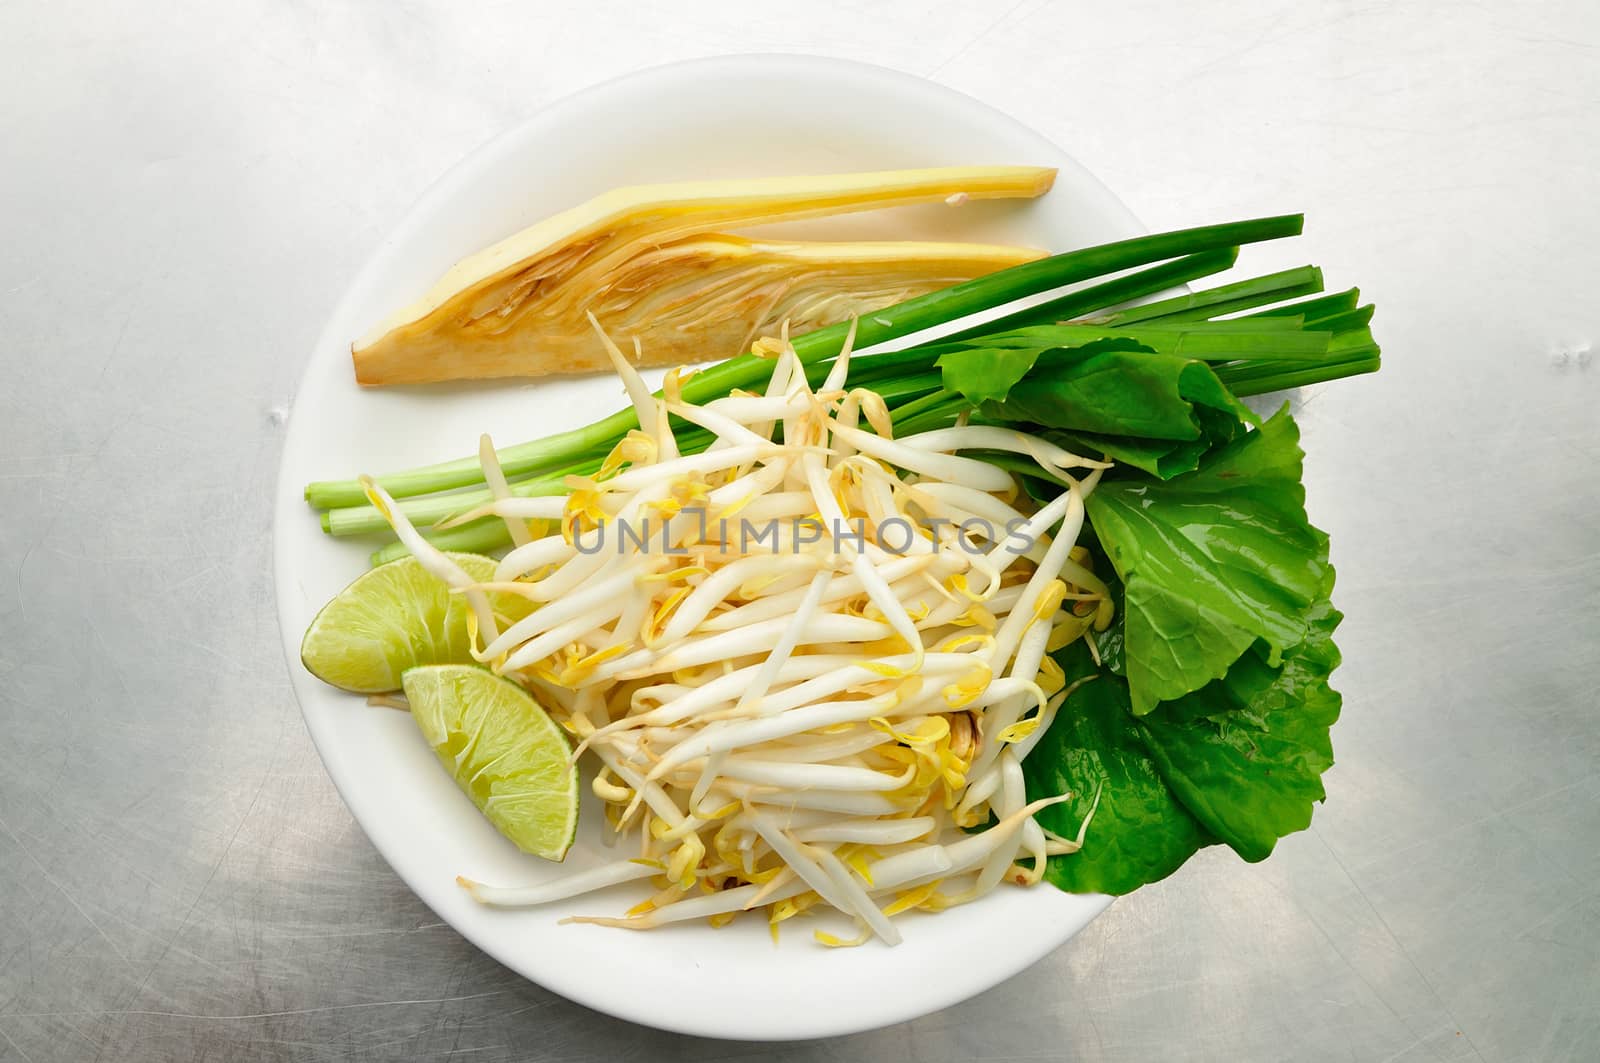 Mix of Thai Vegetable, Bean sprout, lime, banana blossom and Garlic chives on white plate.